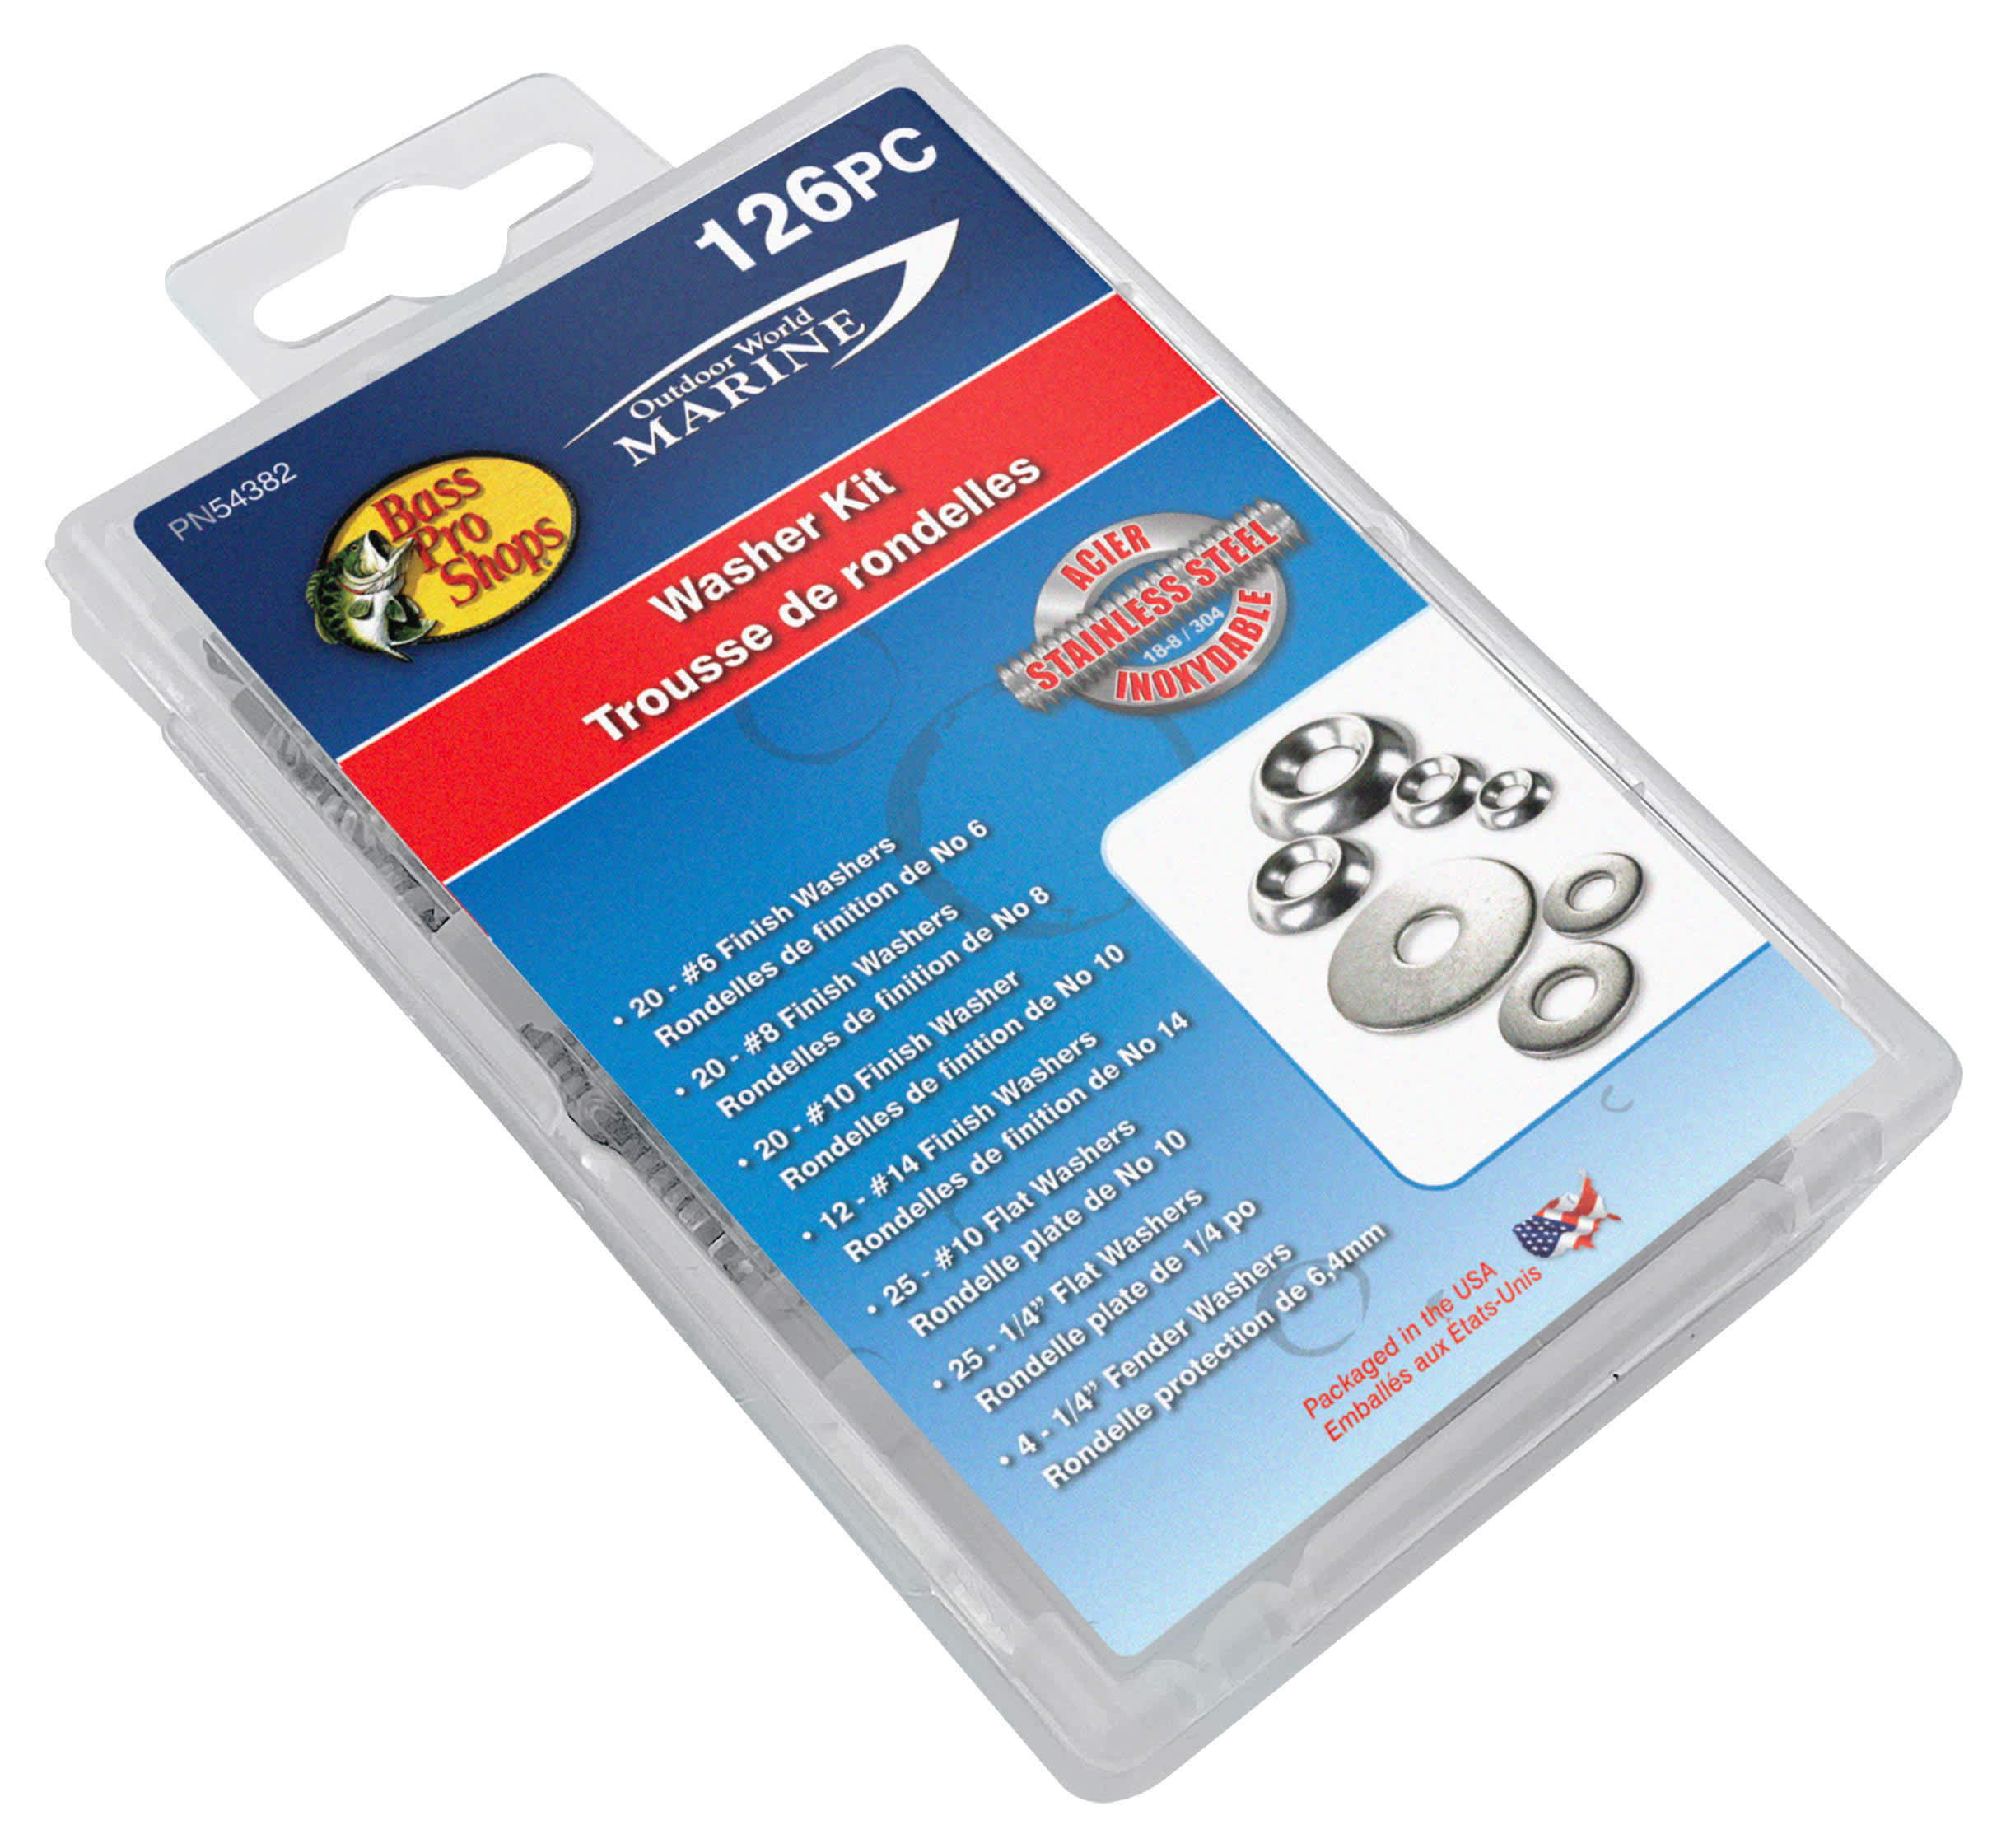 Bass Pro Shops® Stainless Steel Washer 126-Piece Kit